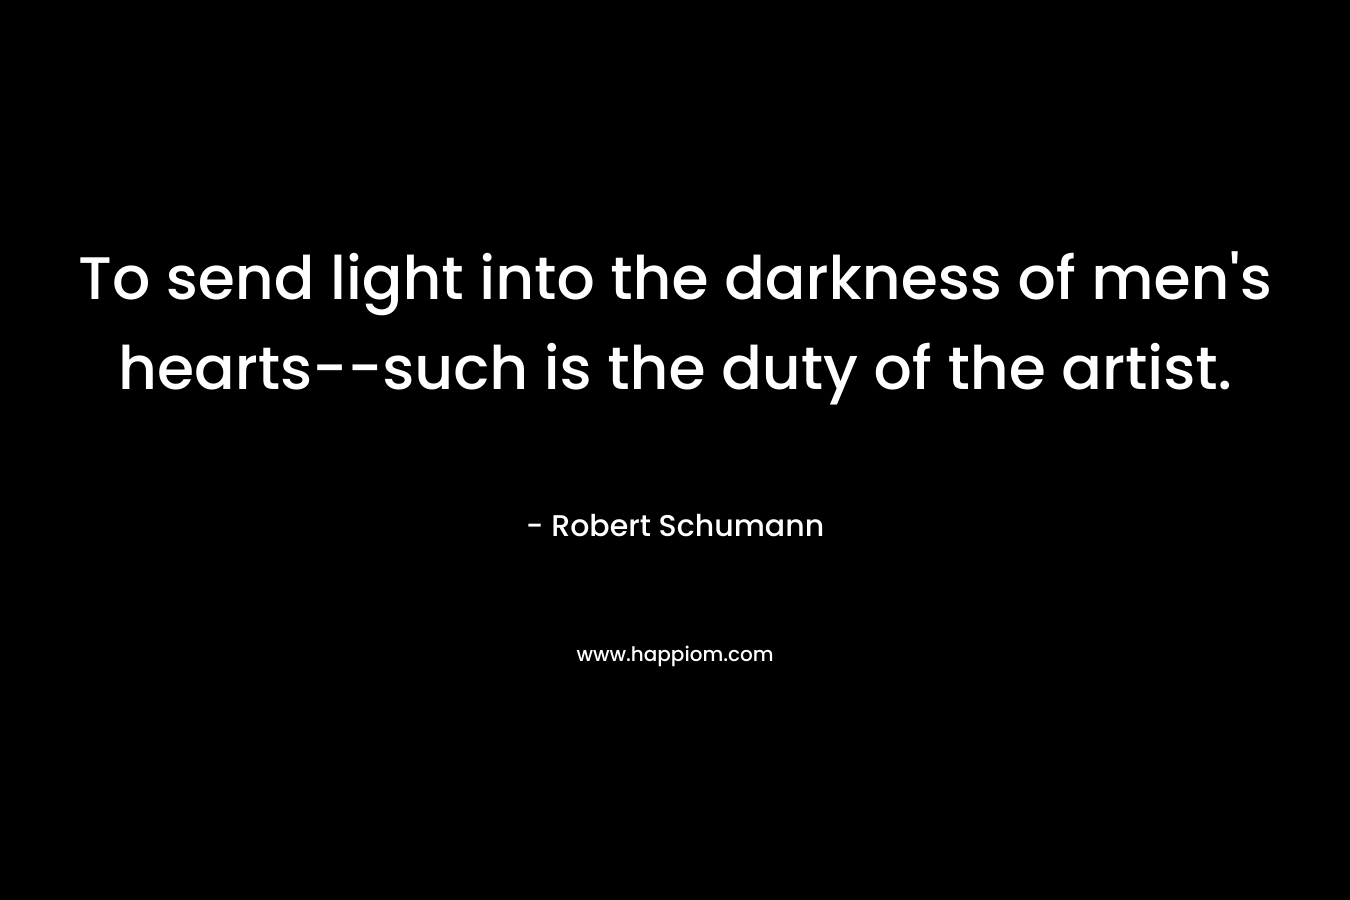 To send light into the darkness of men's hearts--such is the duty of the artist.